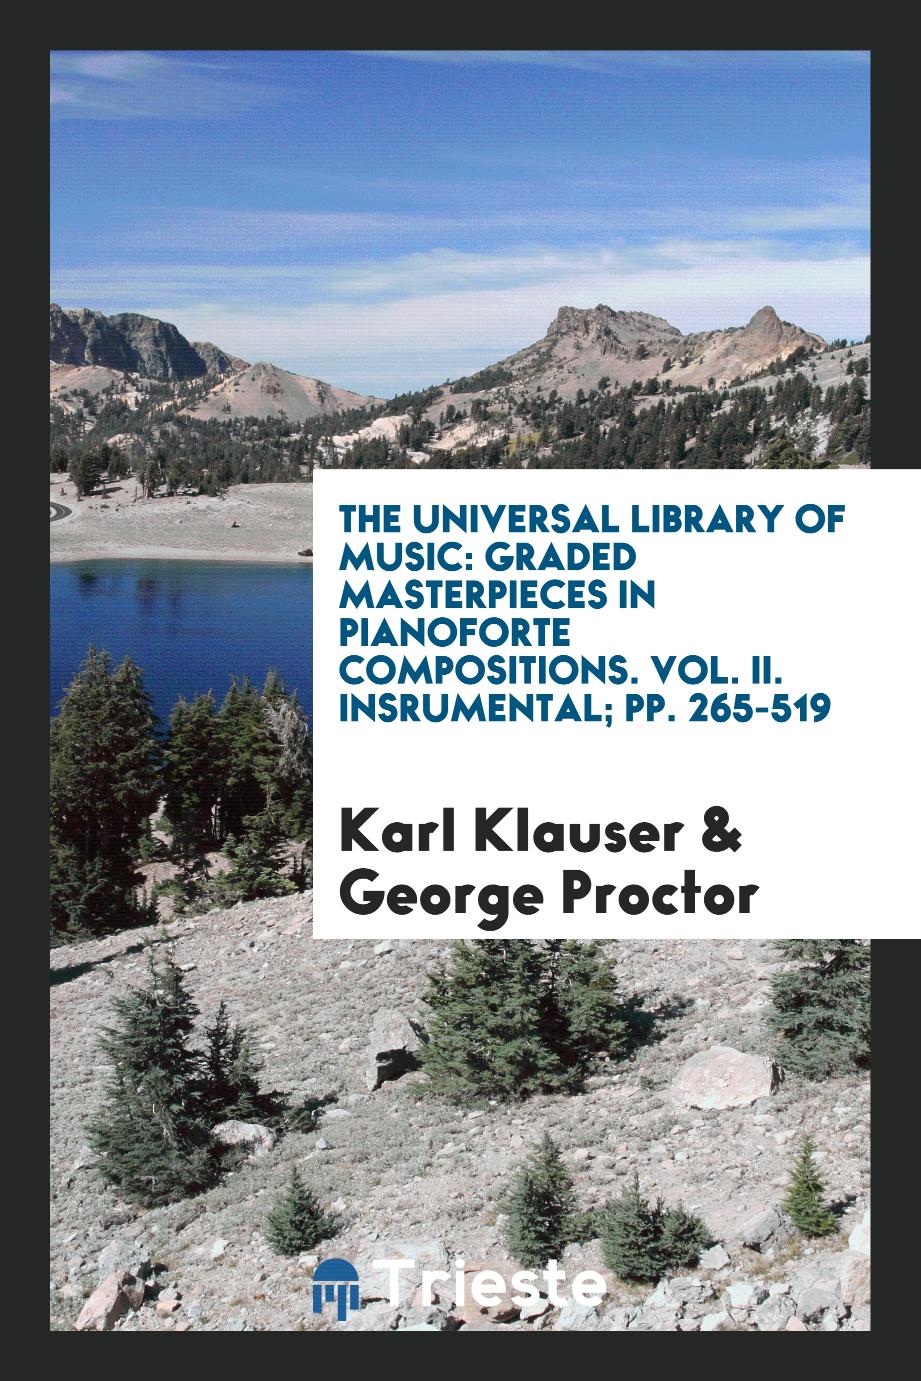 The Universal Library of Music: Graded Masterpieces in Pianoforte Compositions. Vol. II. Insrumental; pp. 265-519